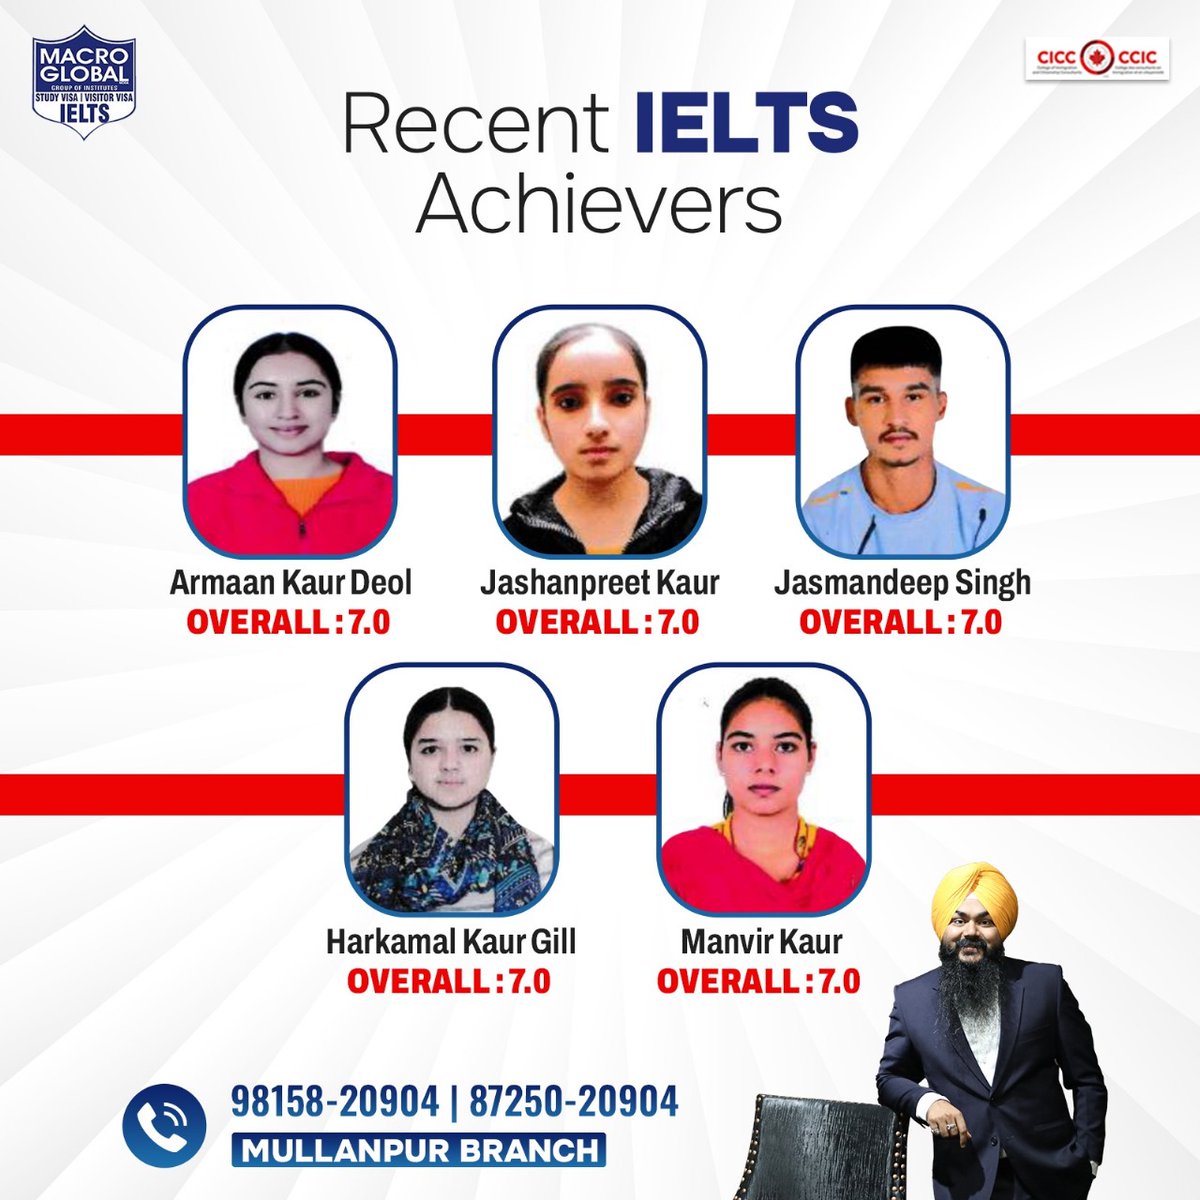 Our students are soaring high!🌟They've achieved an impressive overall IELTS band score of 7.0.

#MacroGlobal #GurmilapSinghDalla #Canada #Canadastudyvisa #canadaopenworkpermit #spousevisa #Visitorvisa #Visa #IELTS #IELTSTraining #EnrollNow #Immigration #immigrationlawyer #Moga